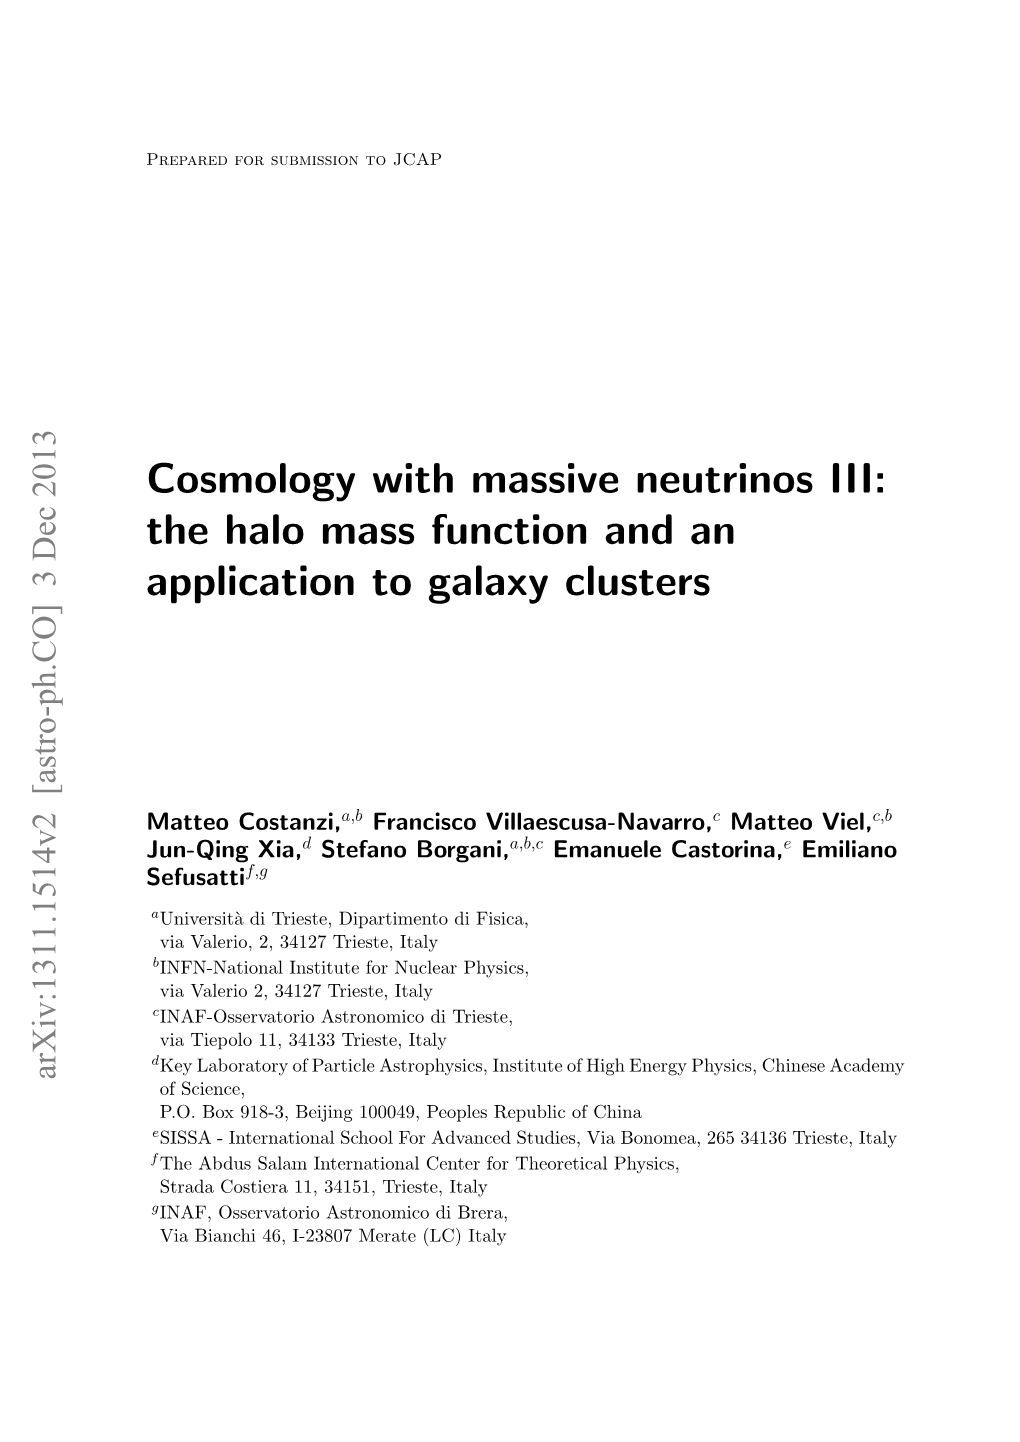 The Halo Mass Function and an Application to Galaxy Clusters